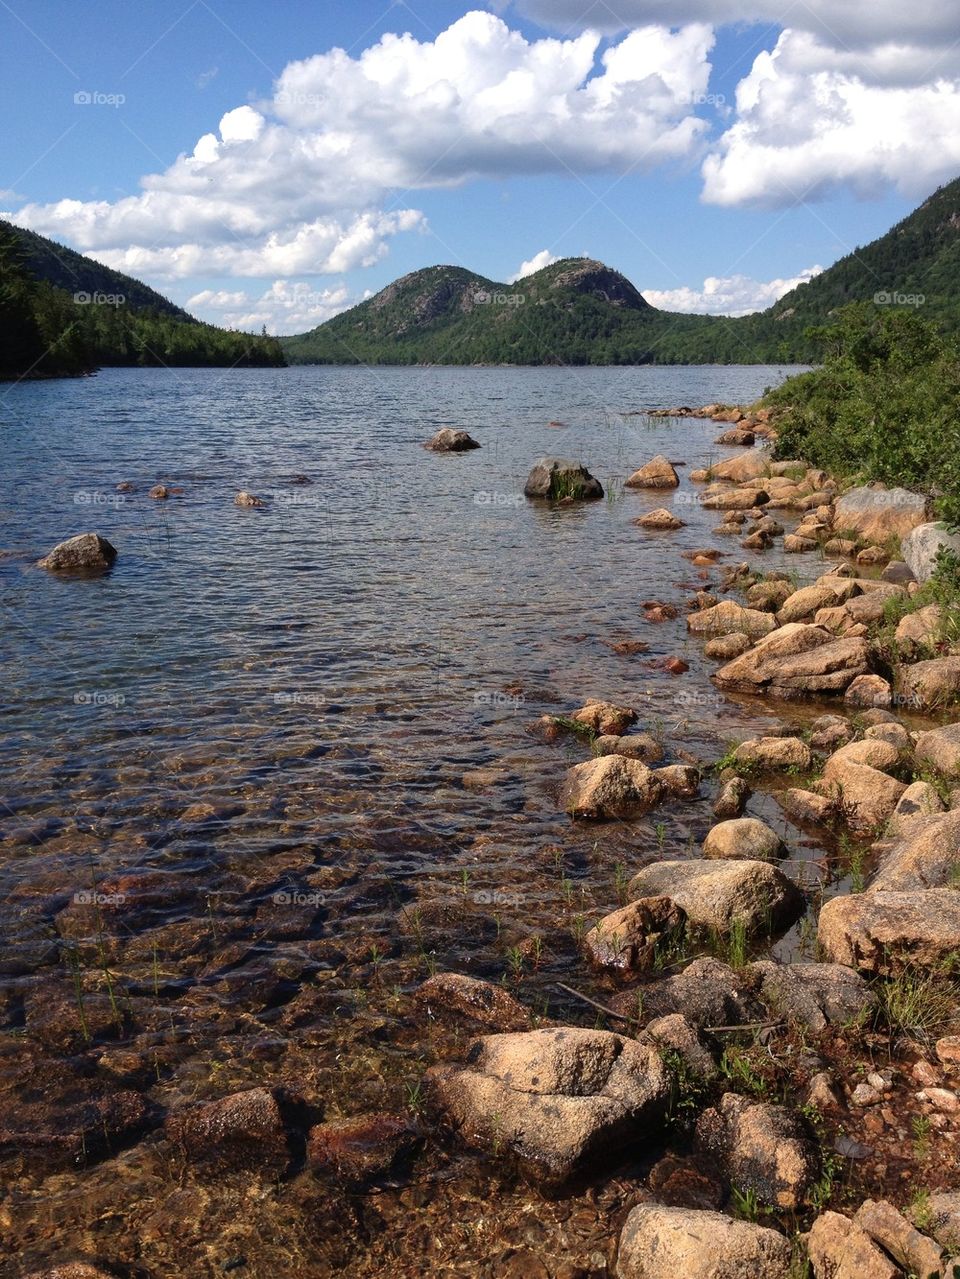 Jordan Pond and "The Bubbles"